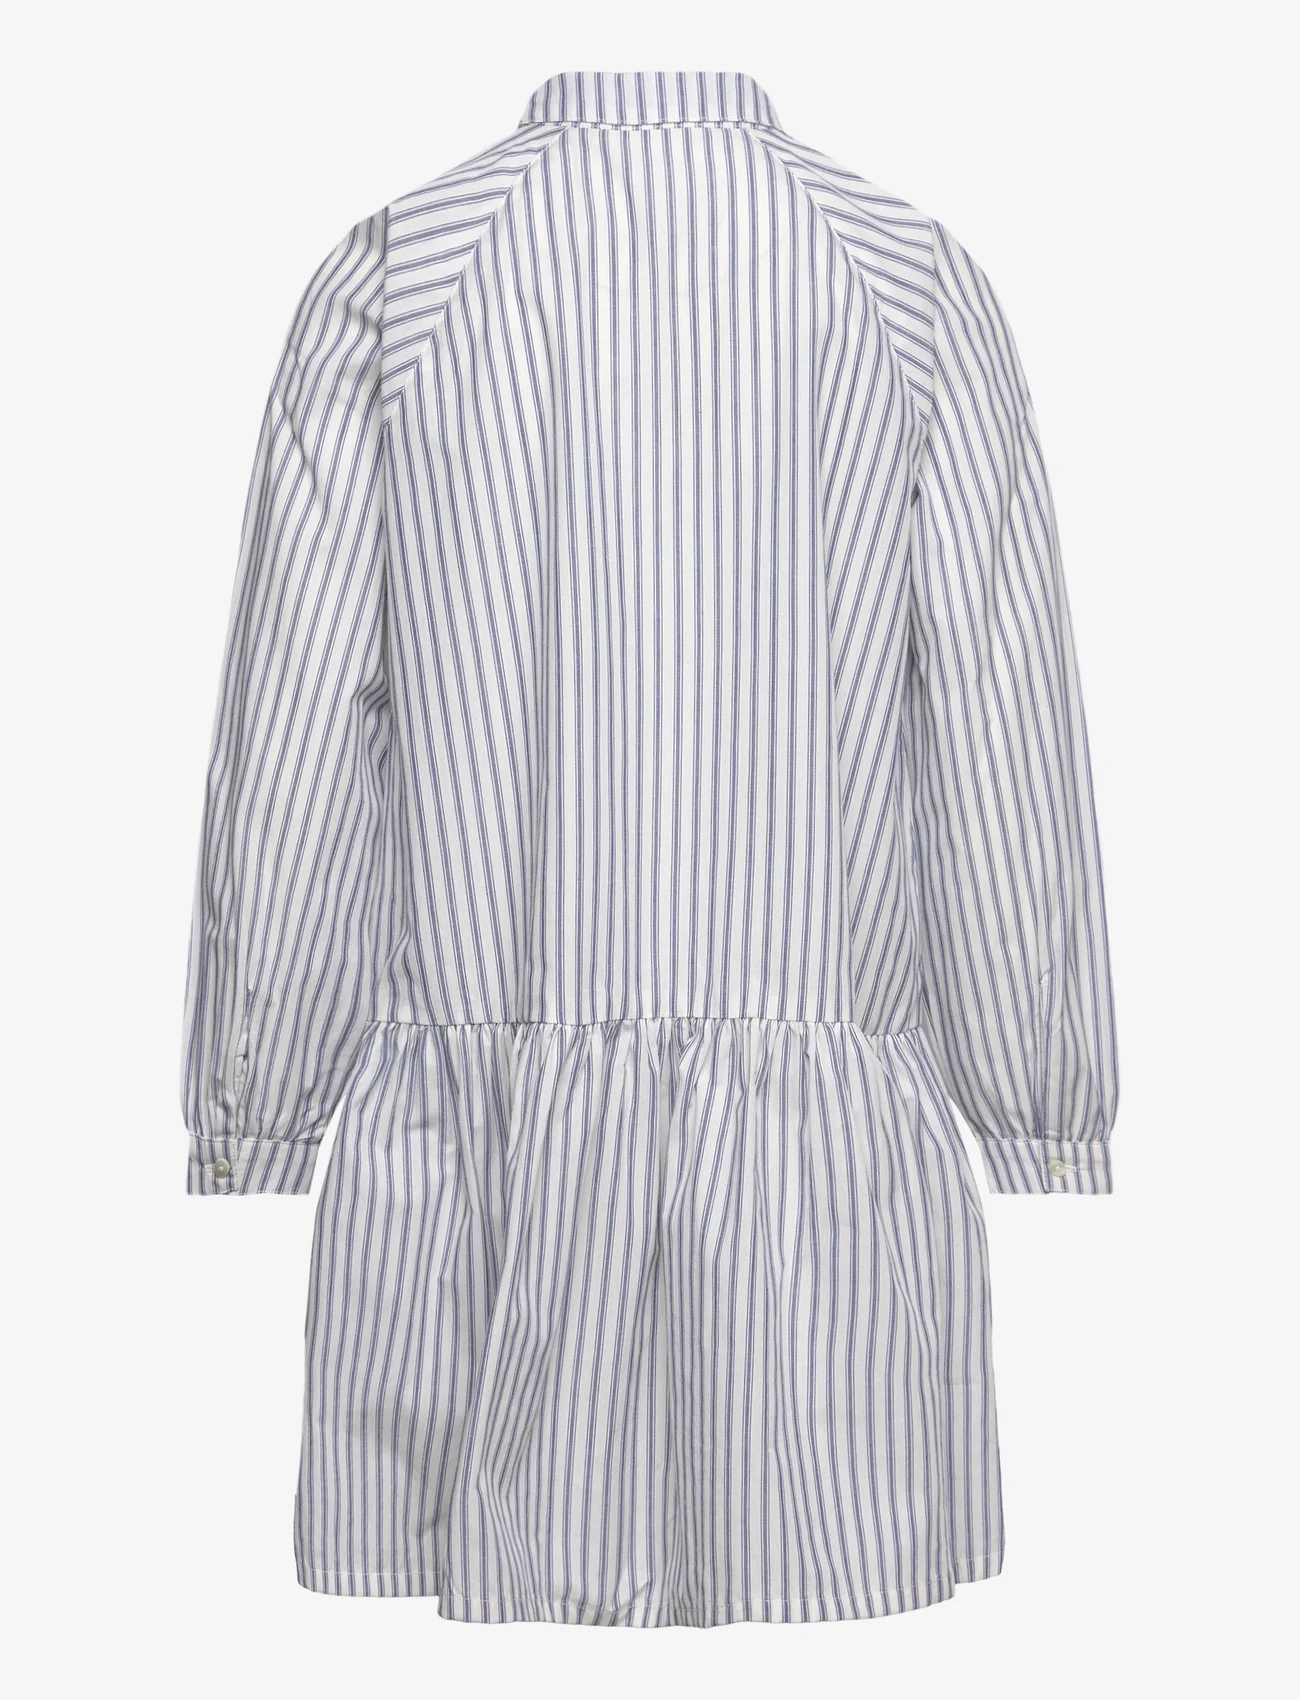 Sofie Schnoor Baby and Kids - Dress - long-sleeved casual dresses - blue striped - 1